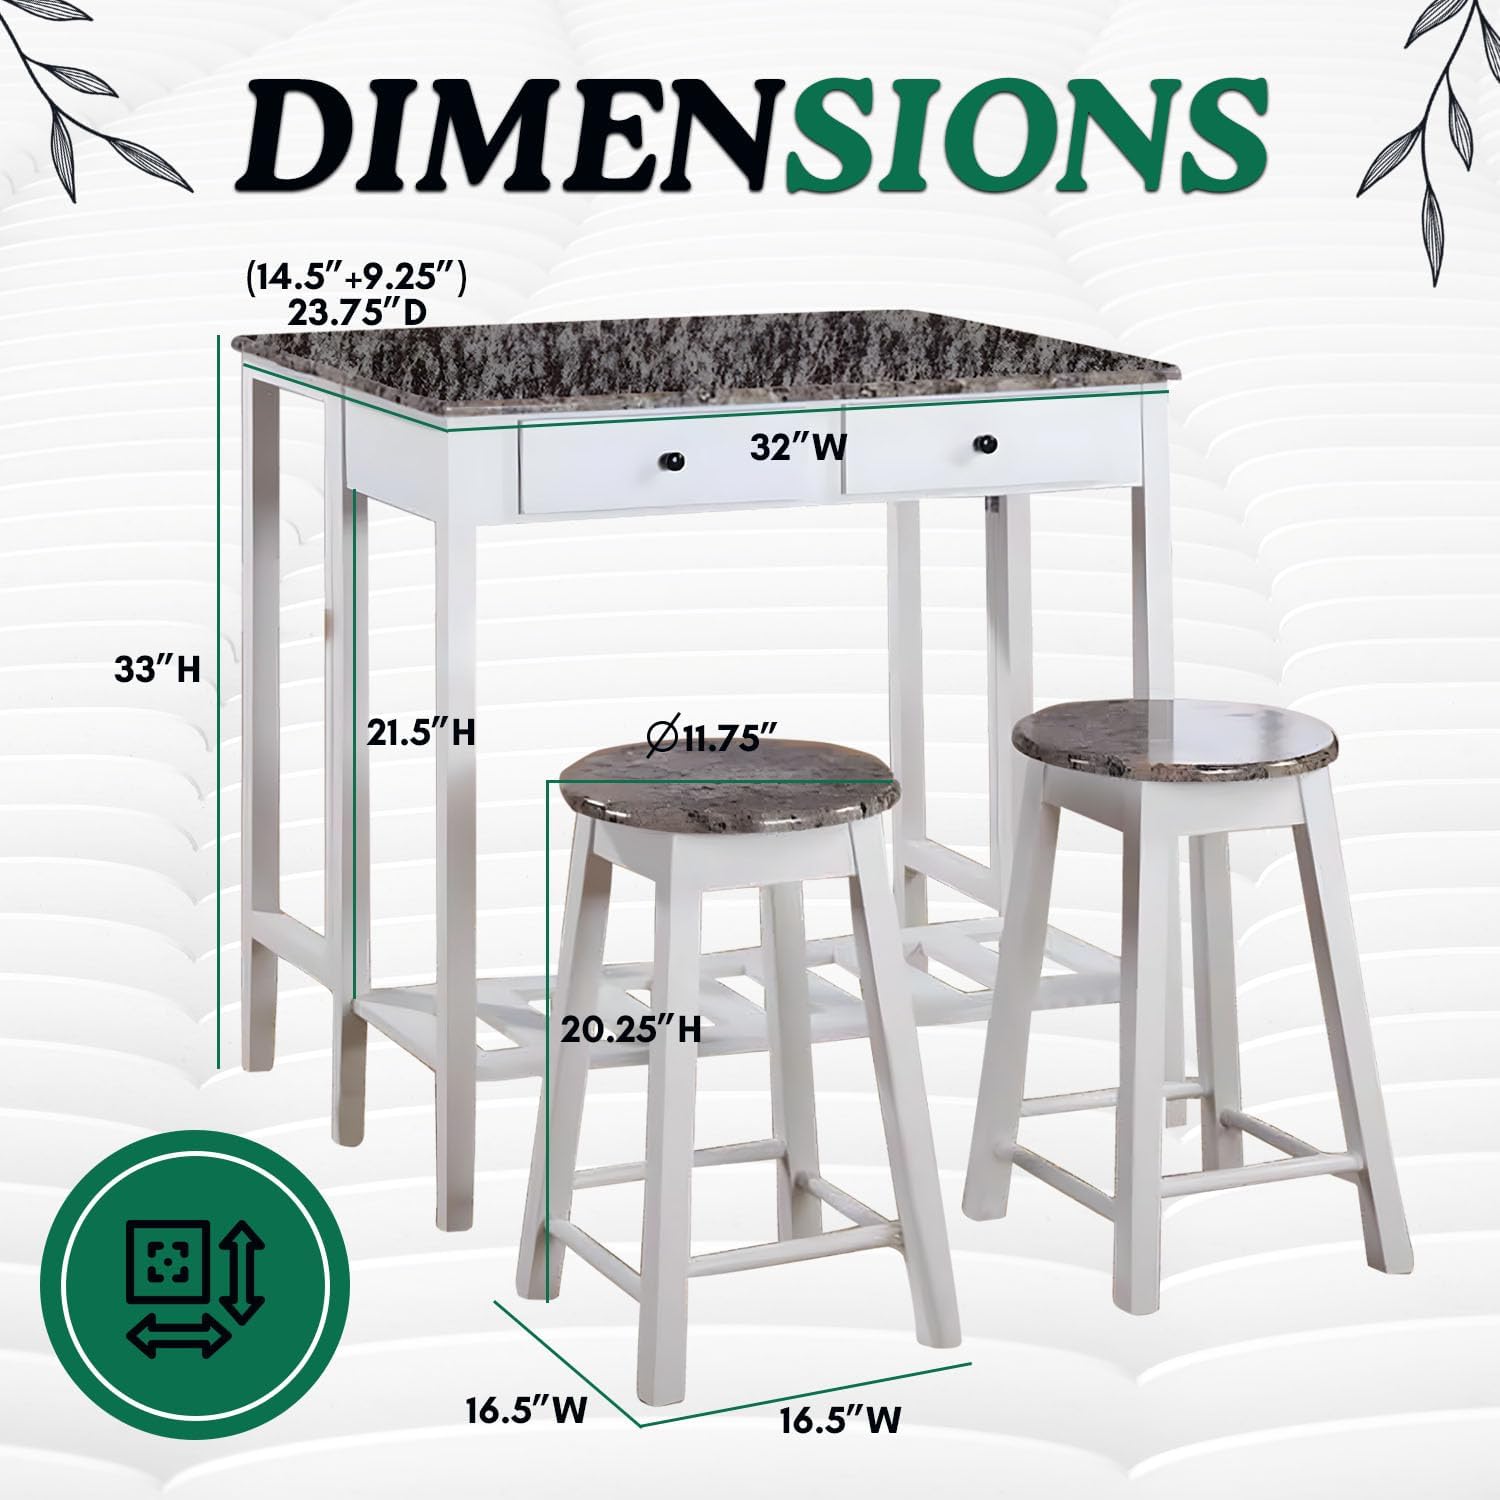 Kings Marble Dining Table Set dimensions